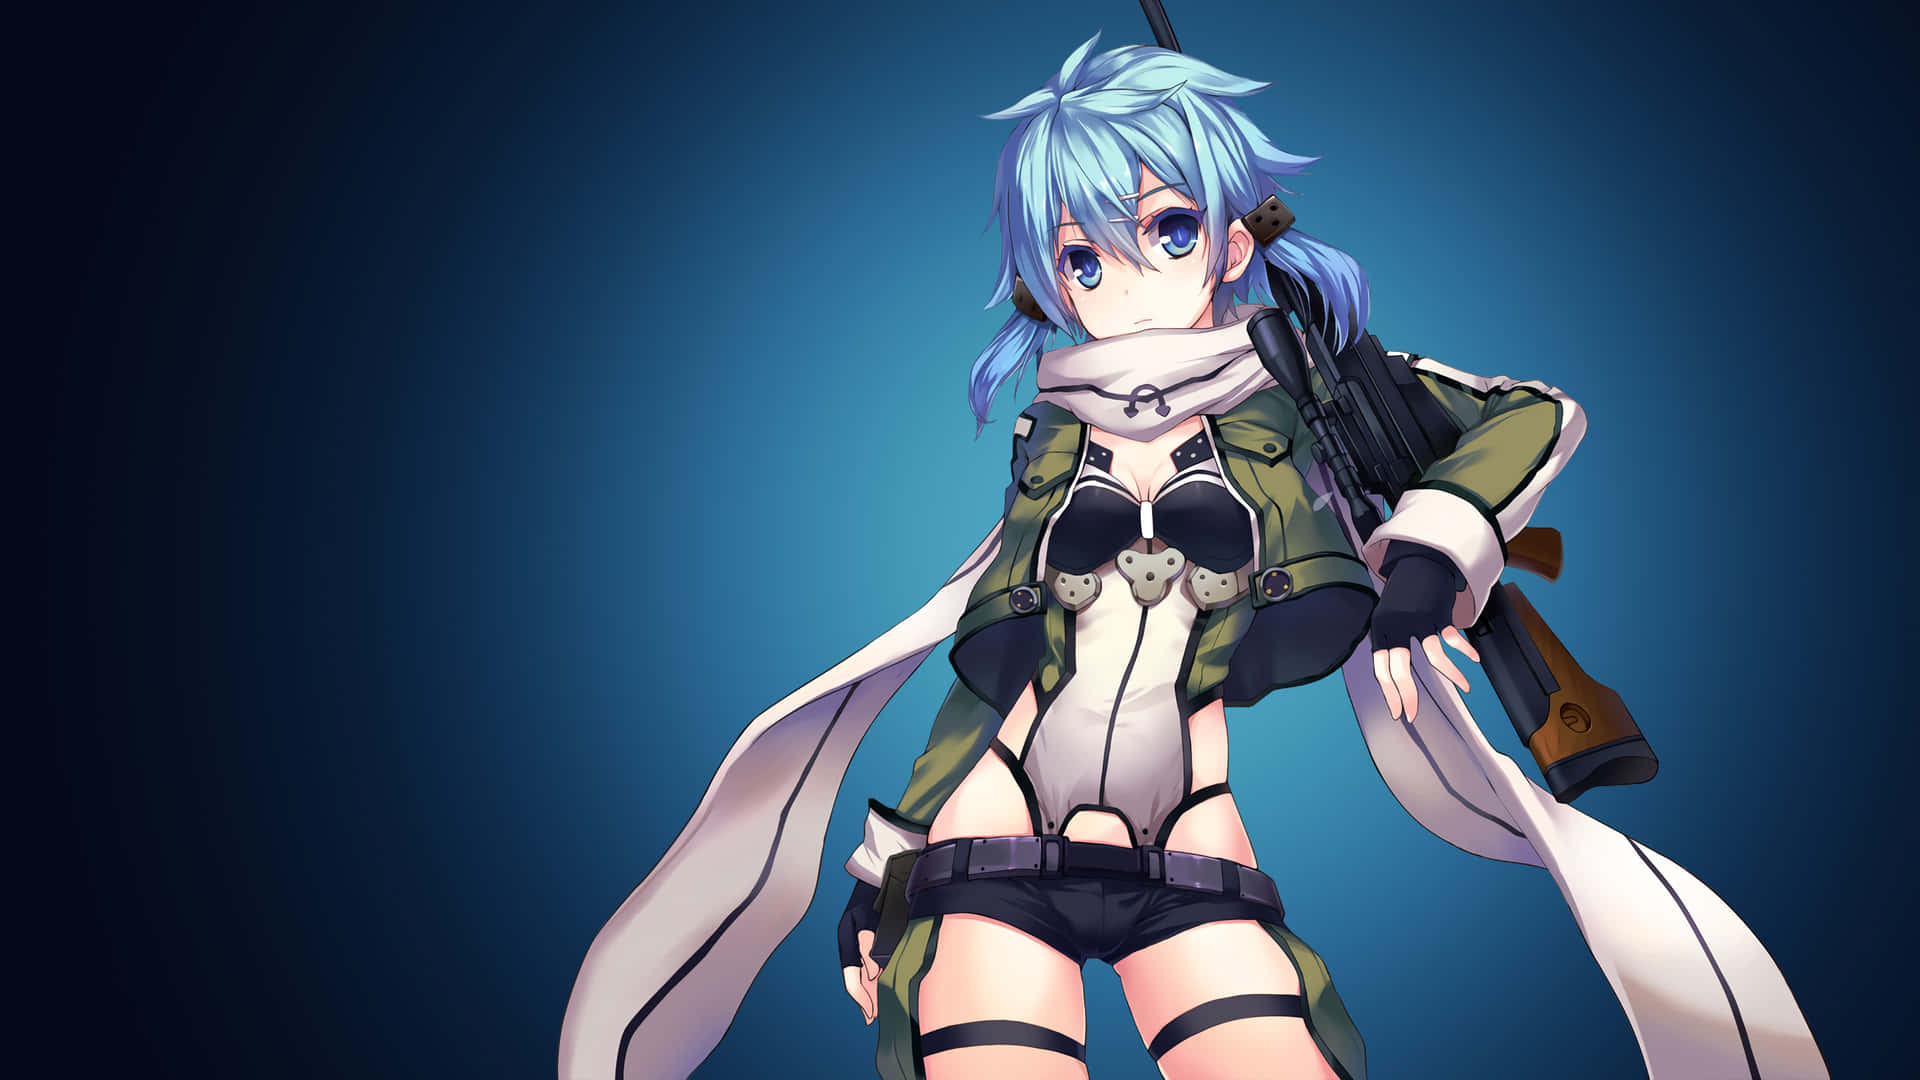 The grace and beauty of Sinon Wallpaper